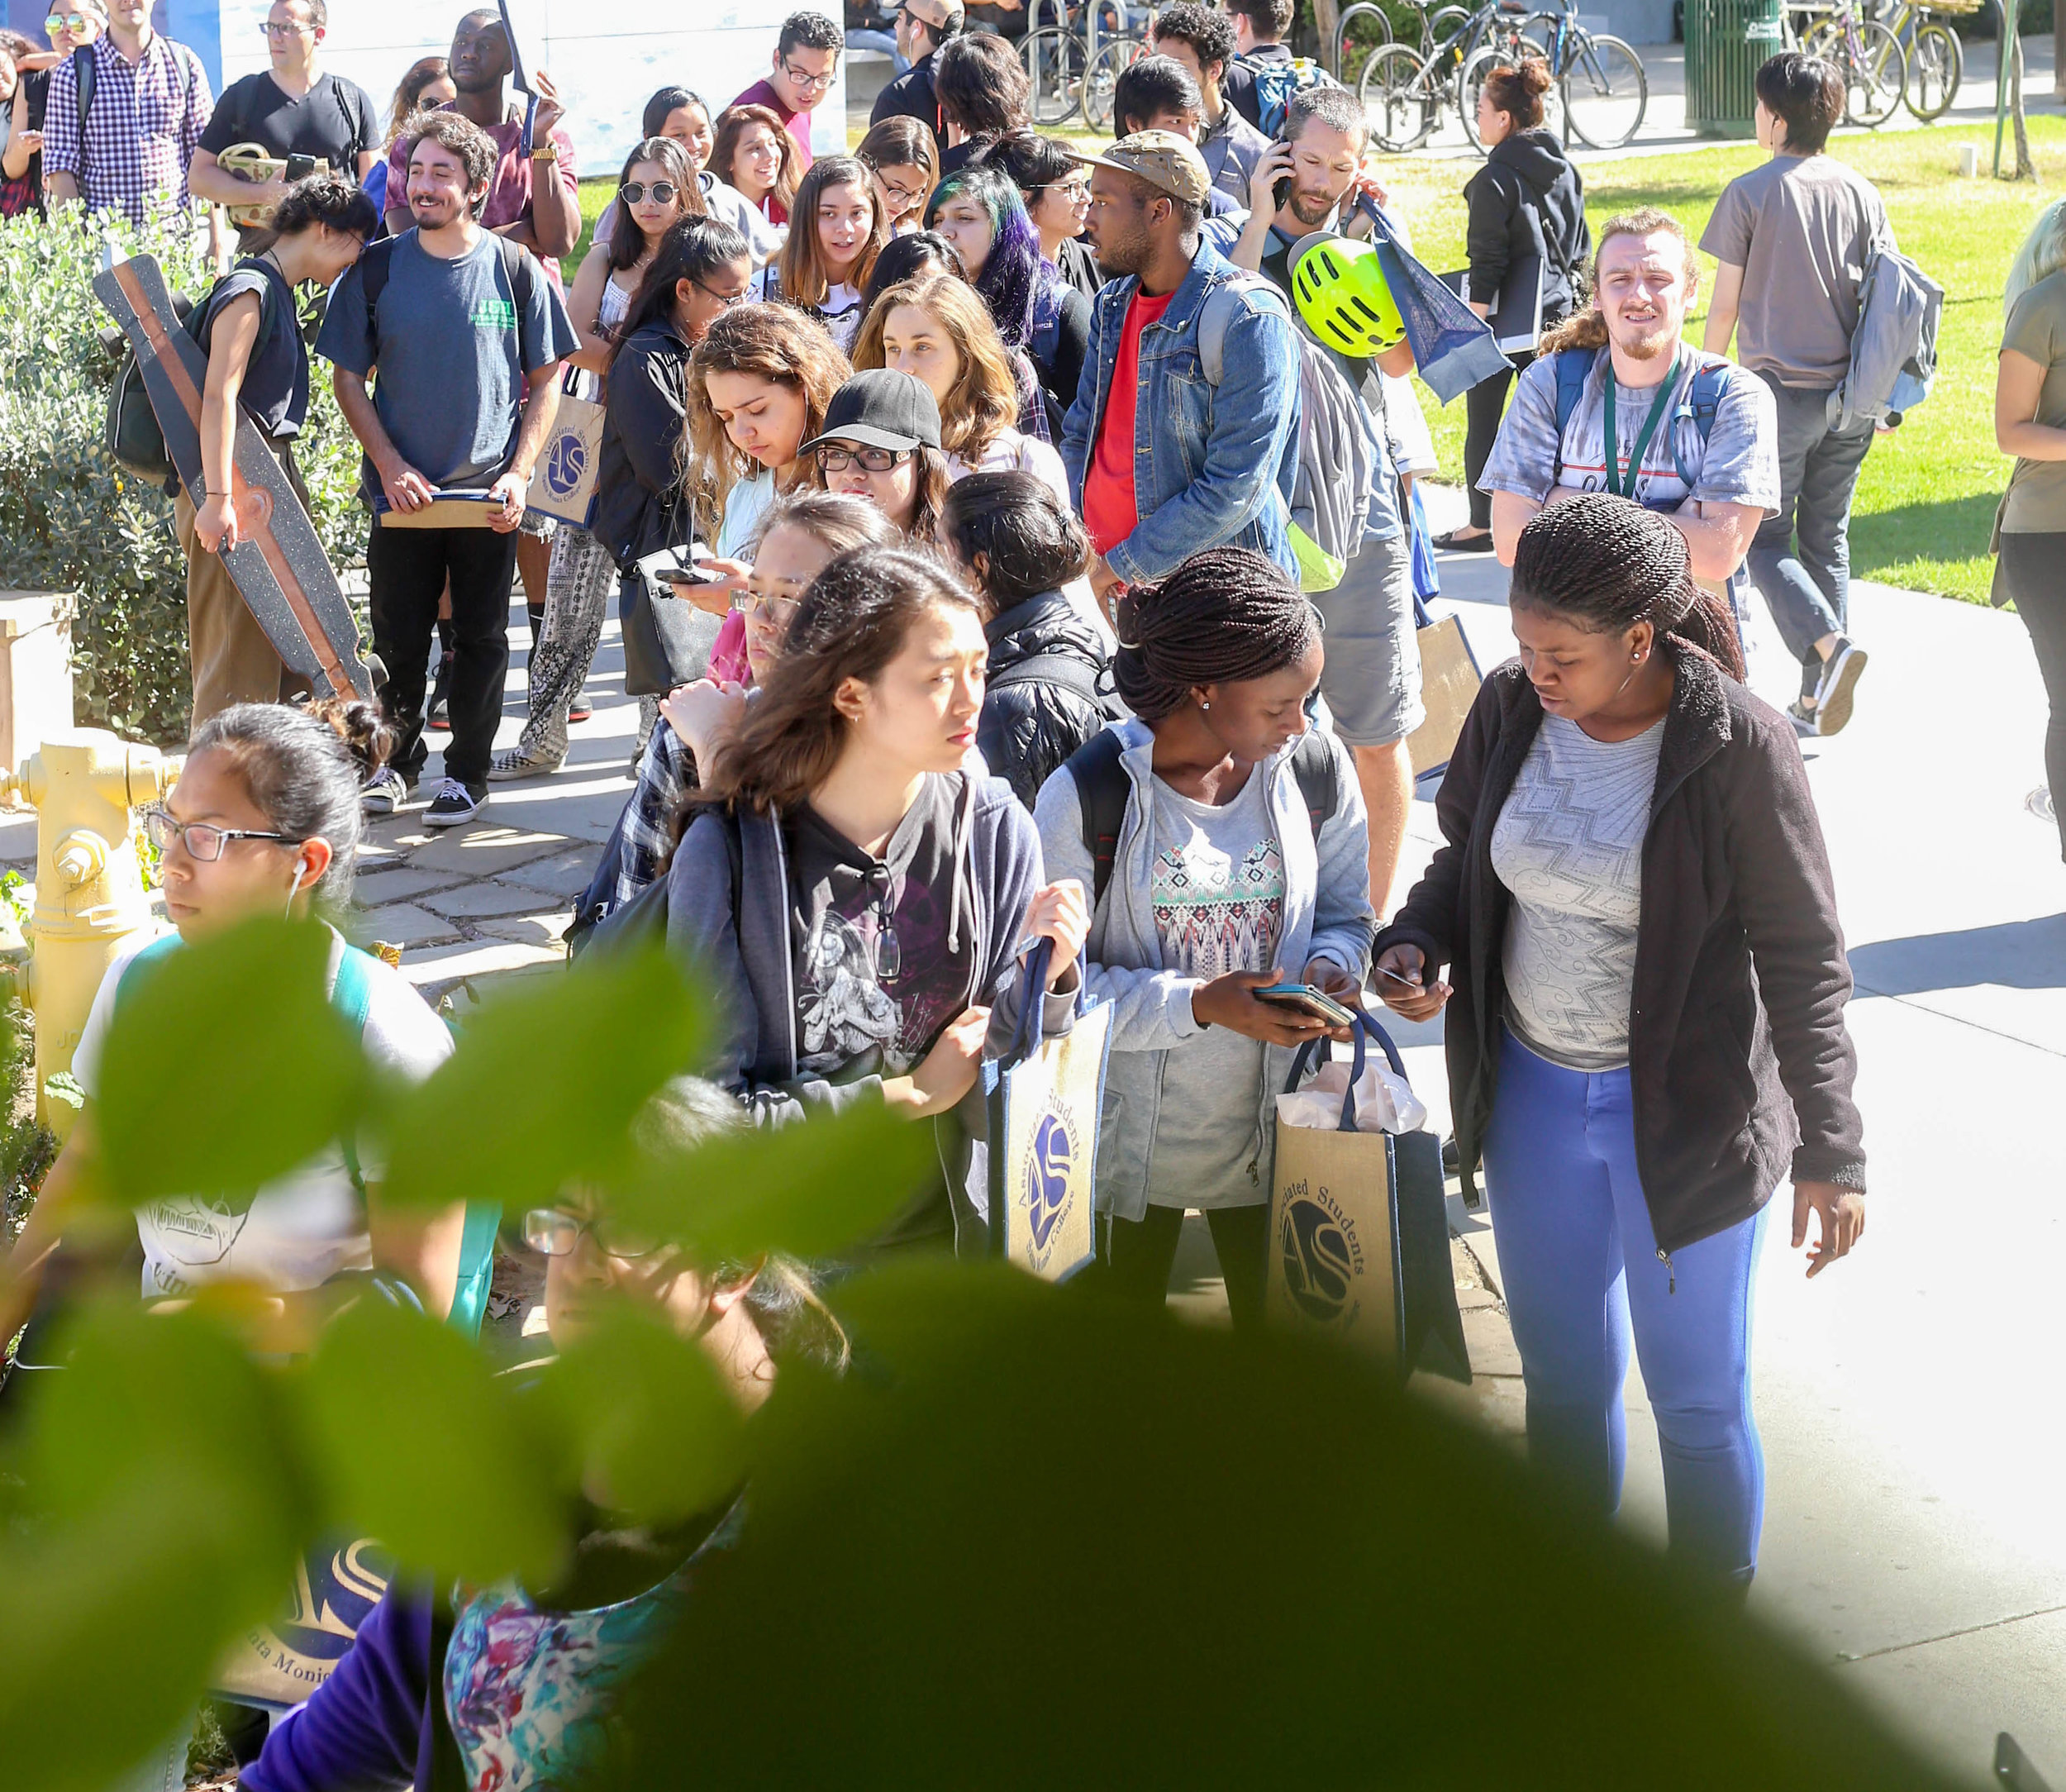  A long line of students wait near  the Organic Learning Garden for their free produce at 11 am that is put on by the Associated Students for Sustainability week at Santa Monica College's Main Campus in Santa Monica, Calif on Monday, October 16th 201